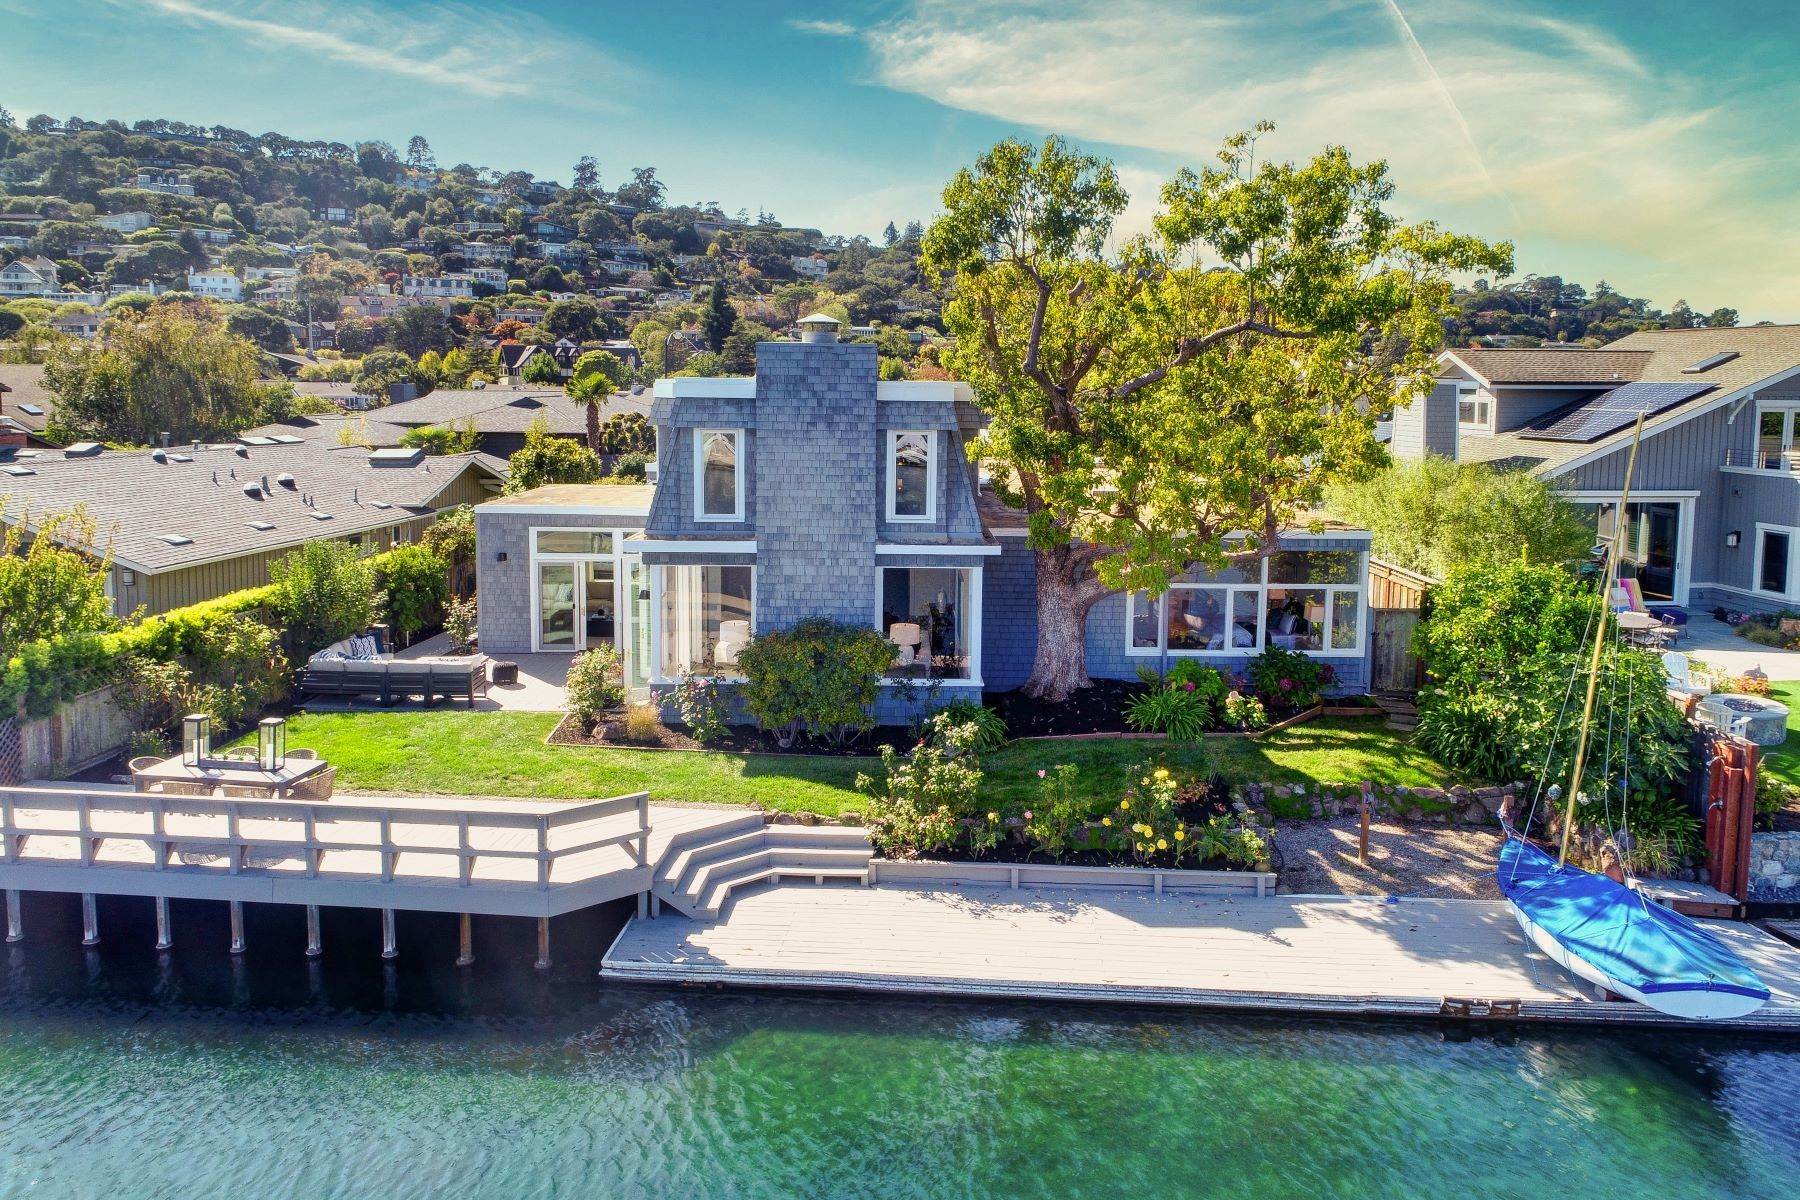 Single Family Homes for Sale at Belvedere Lagoon 26 Peninsula Road Belvedere, California 94920 United States